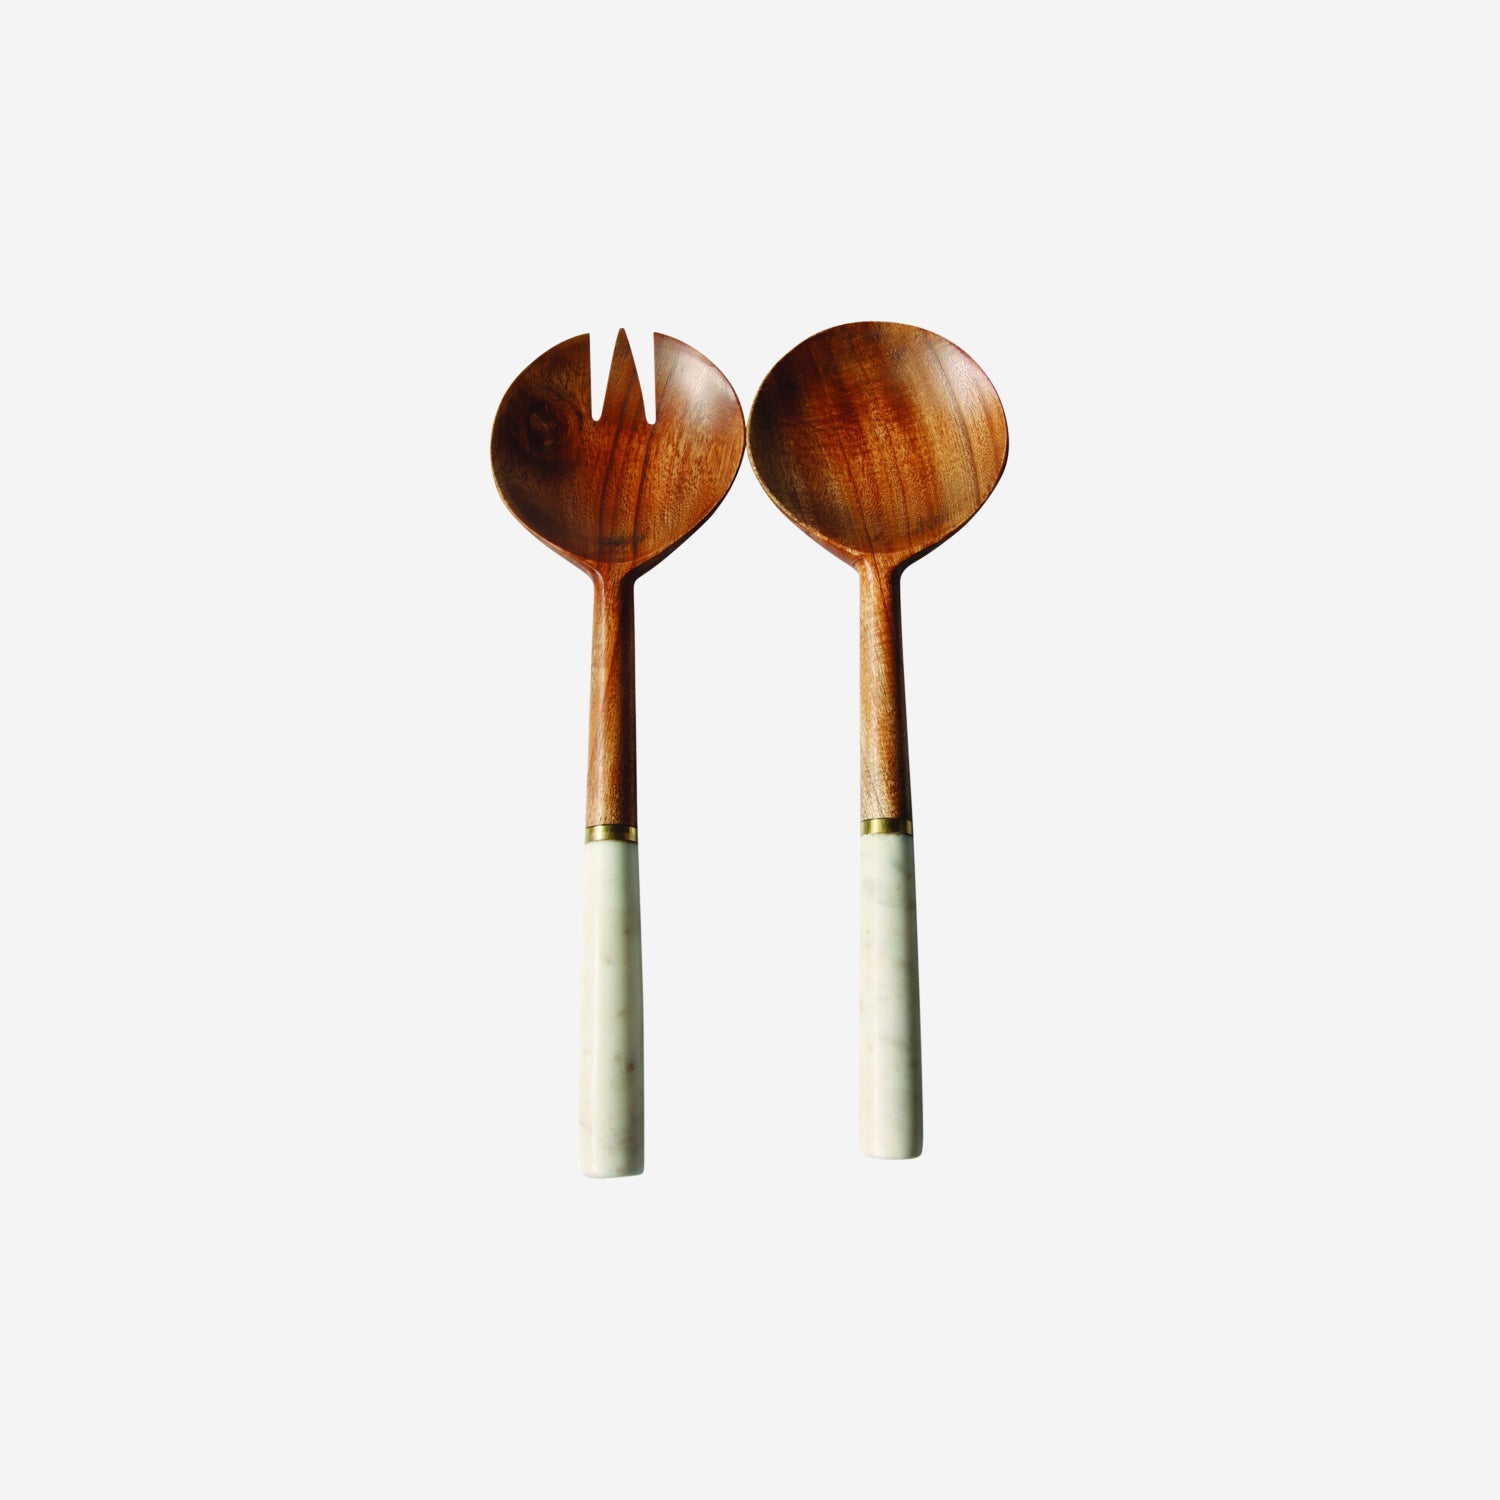 White Marble and Wood Serving Set